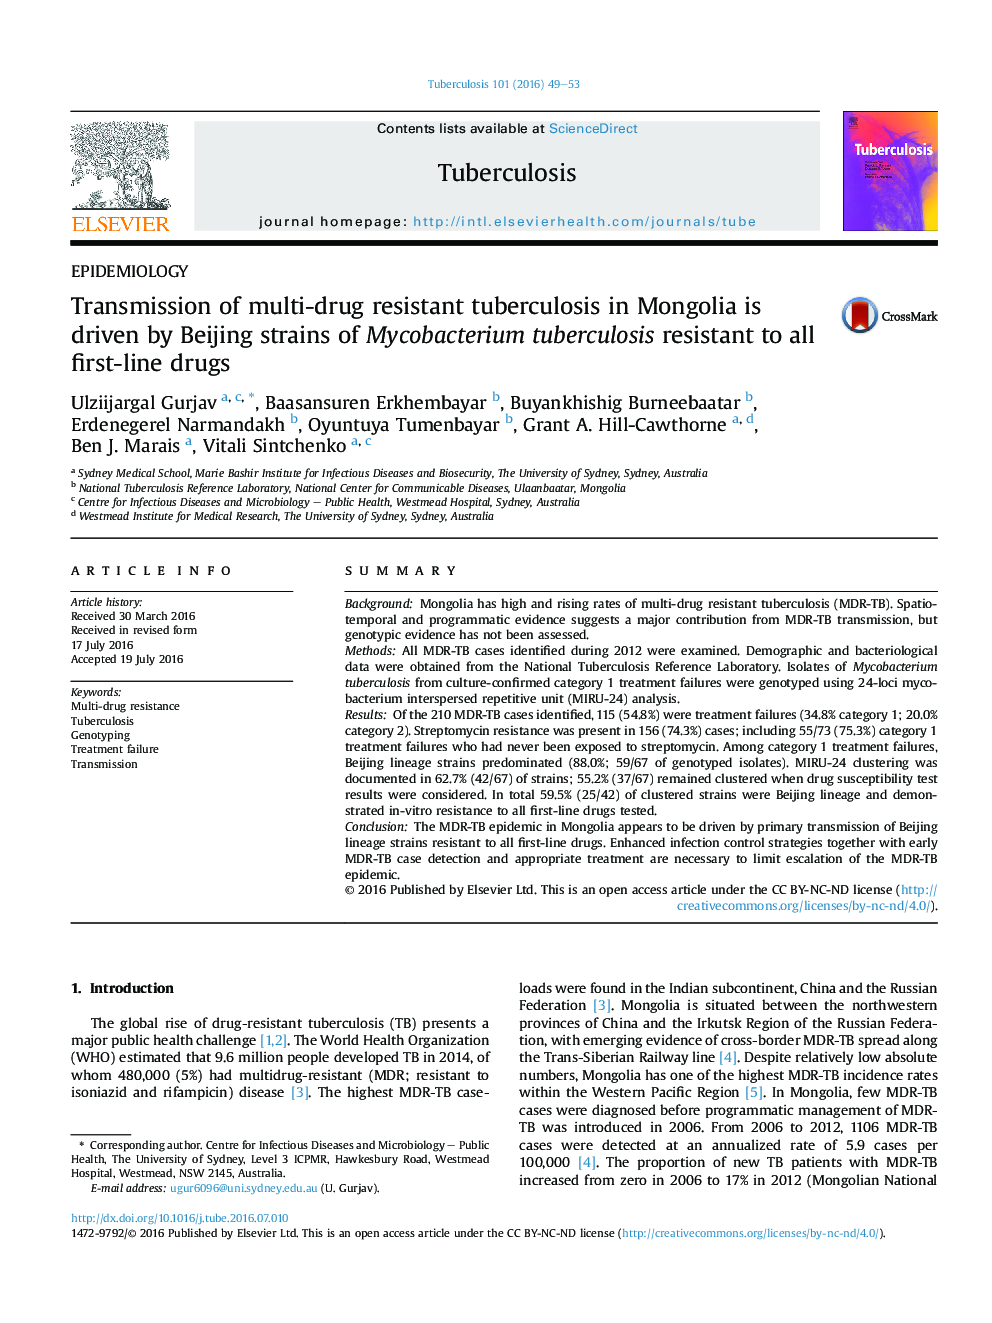 Transmission of multi-drug resistant tuberculosis in Mongolia is driven by Beijing strains of Mycobacterium tuberculosis resistant to all first-line drugs